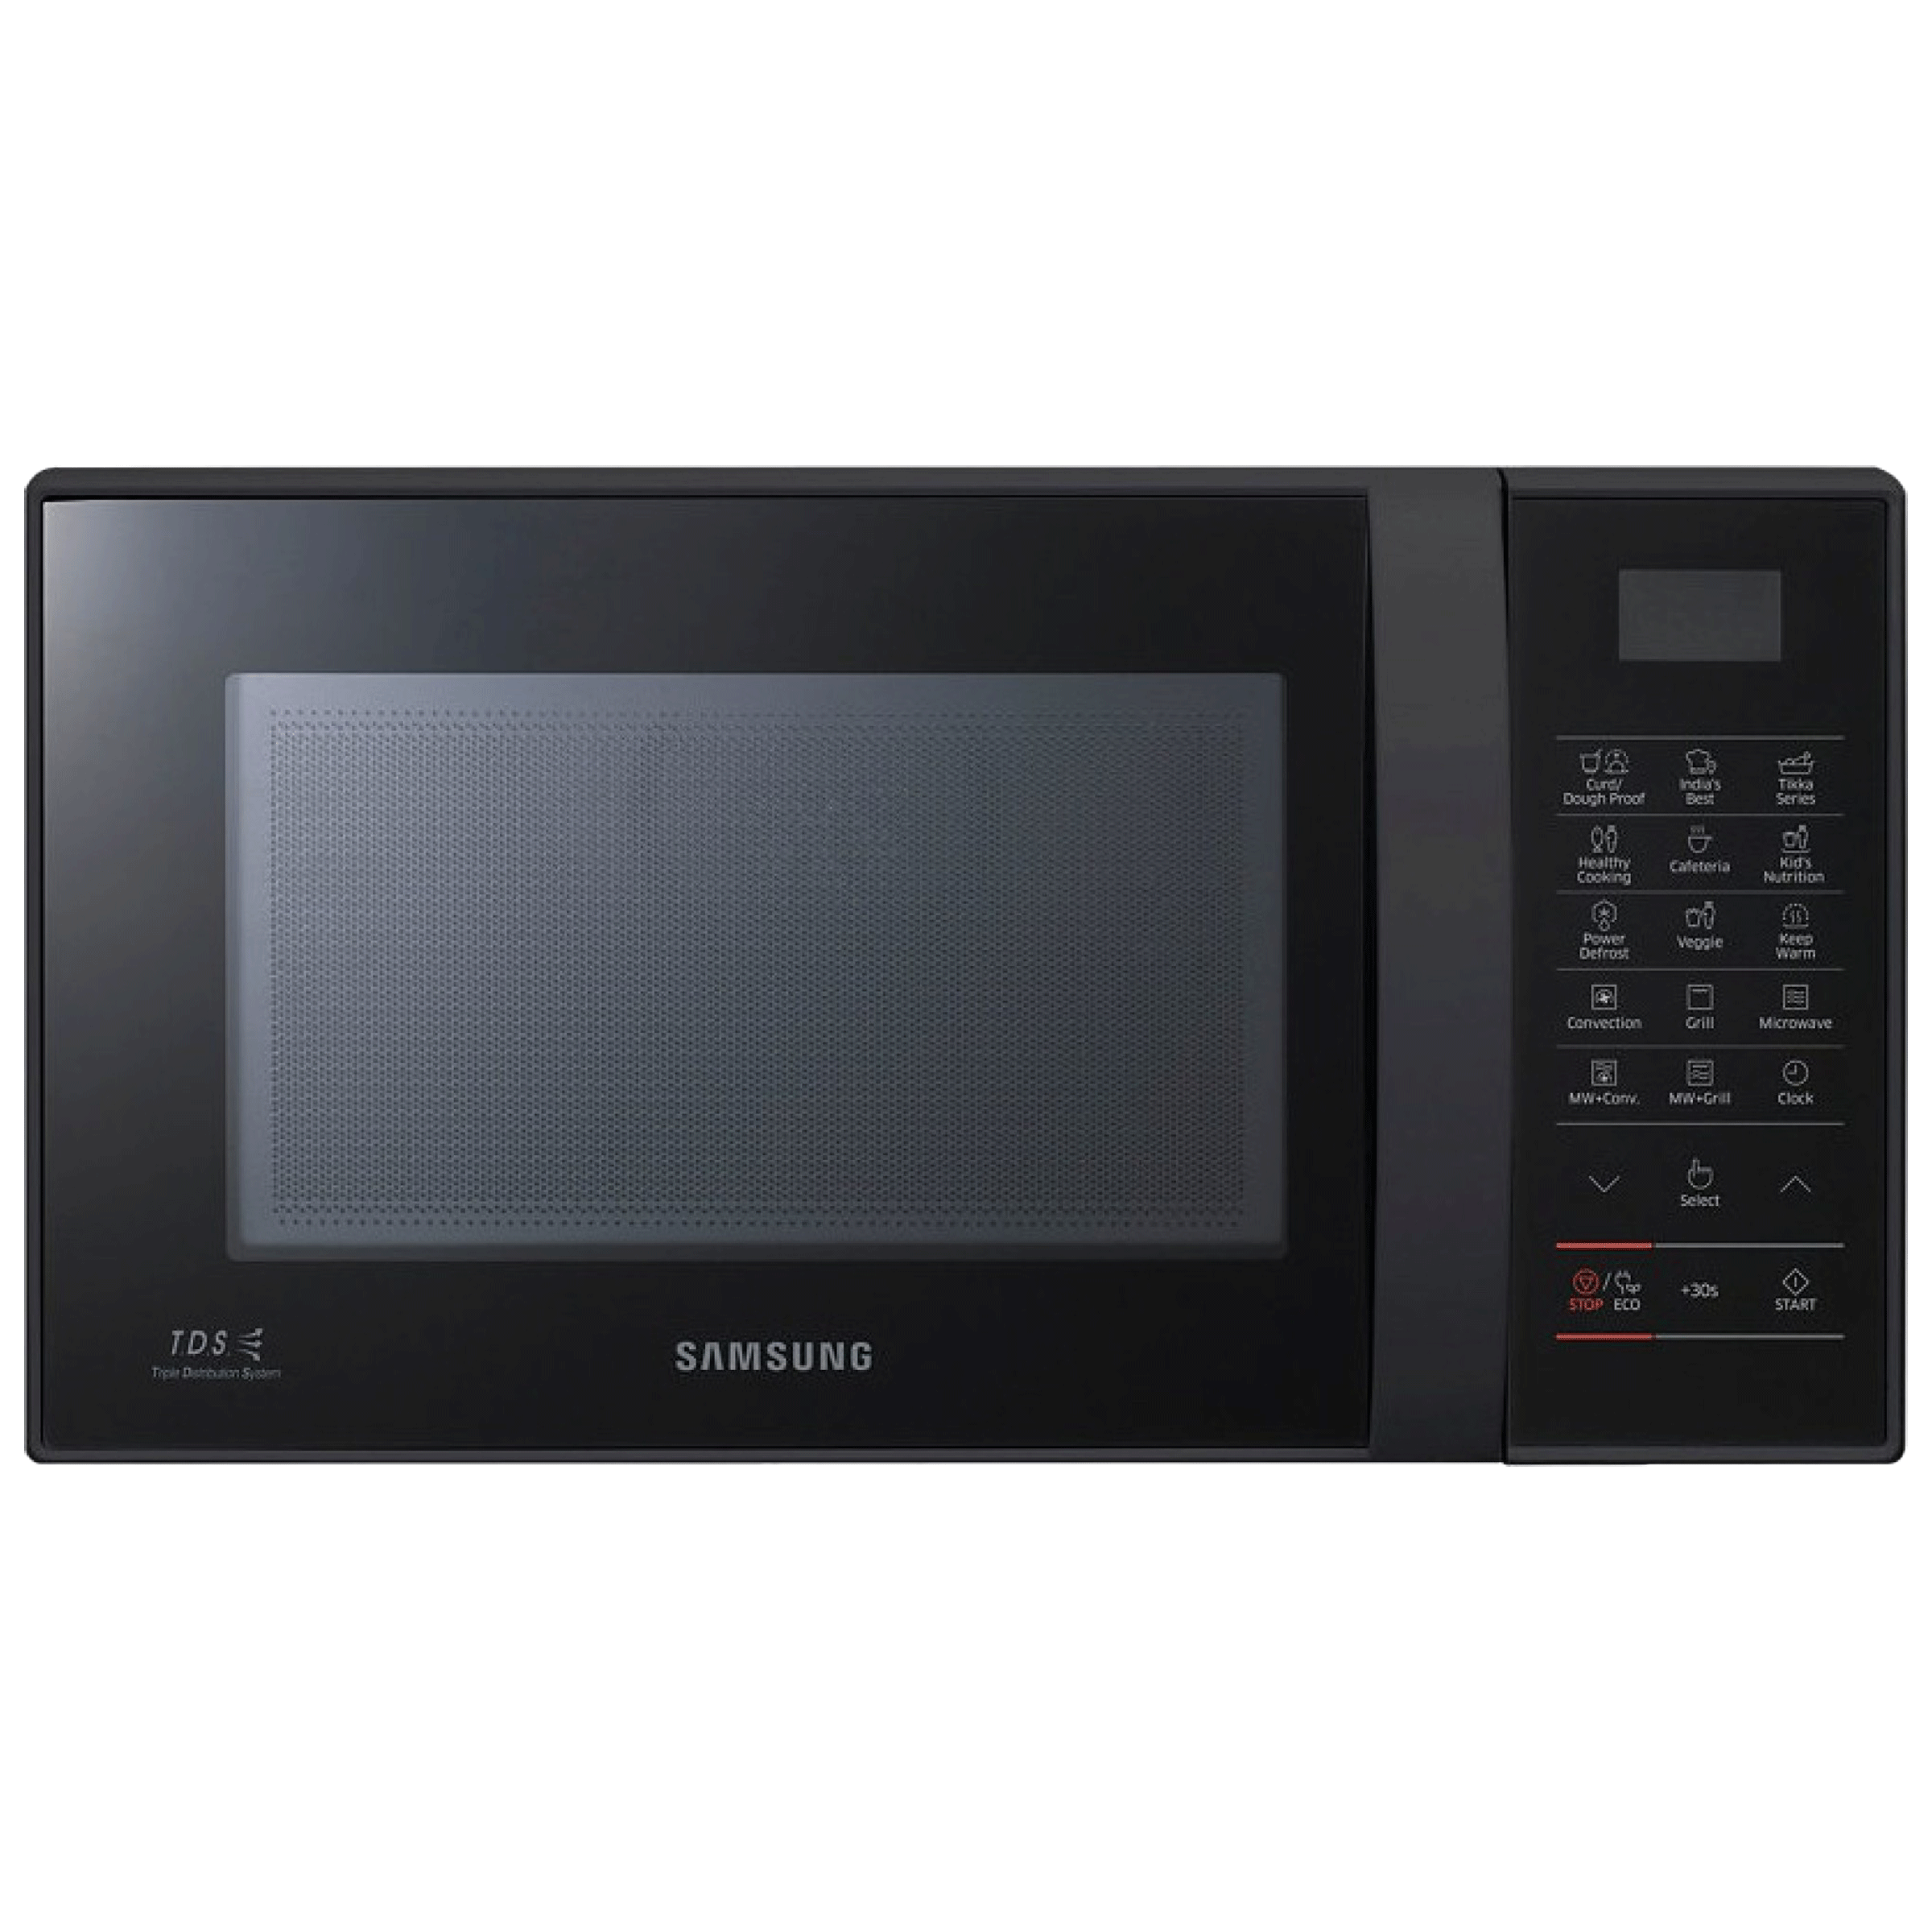 Samsung 21 Litres Convection Microwave Oven (Anti Bacterial Protection, CE76JD-B1/XTL, Black)_1